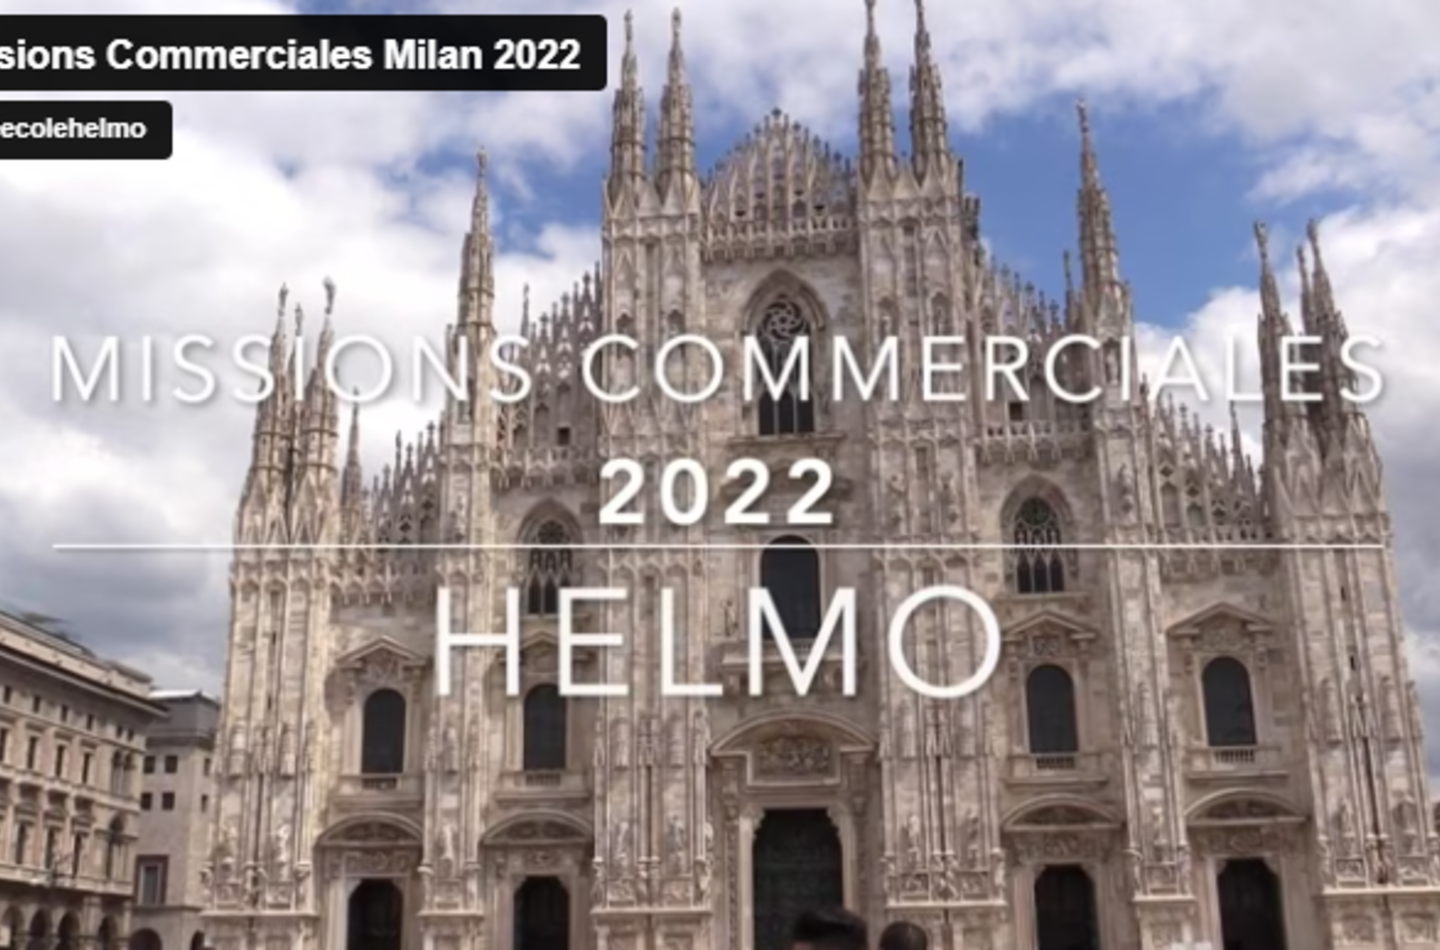 MISSIONS COMMERCIALES MILAN 2022